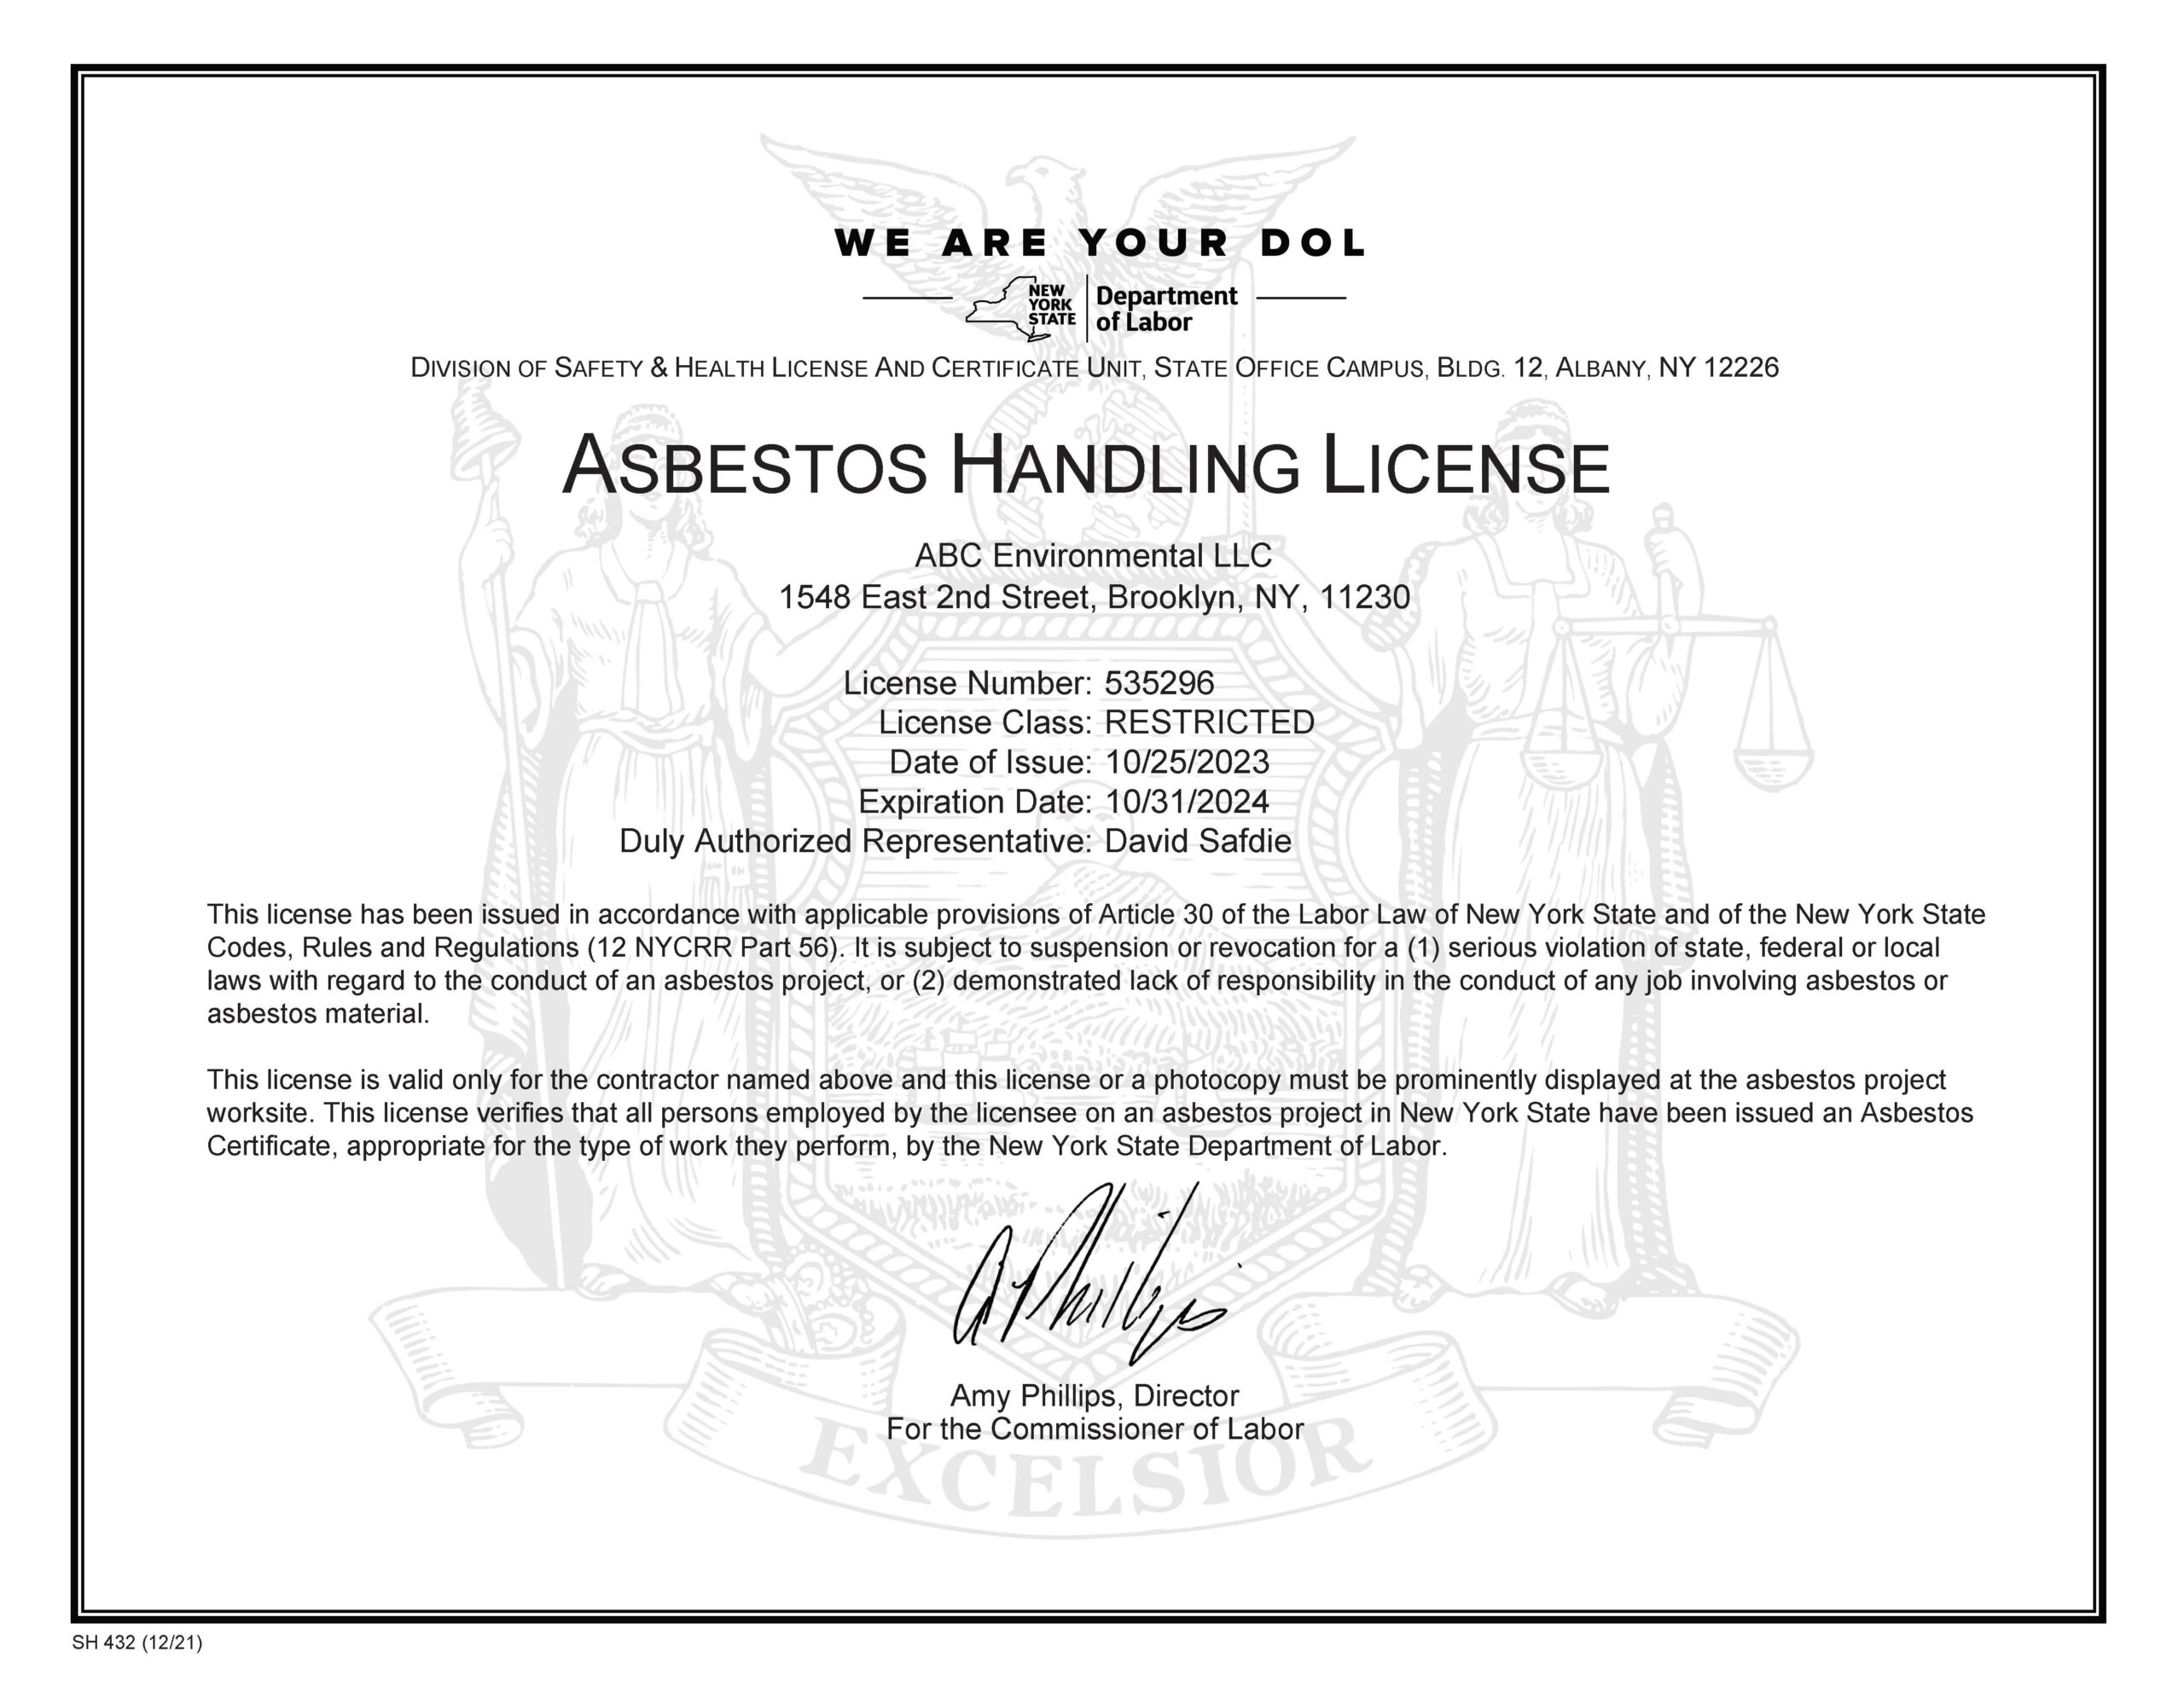 ABC Environmental LLC is a Certified Asbestos Handler in New York & New Jersey Area